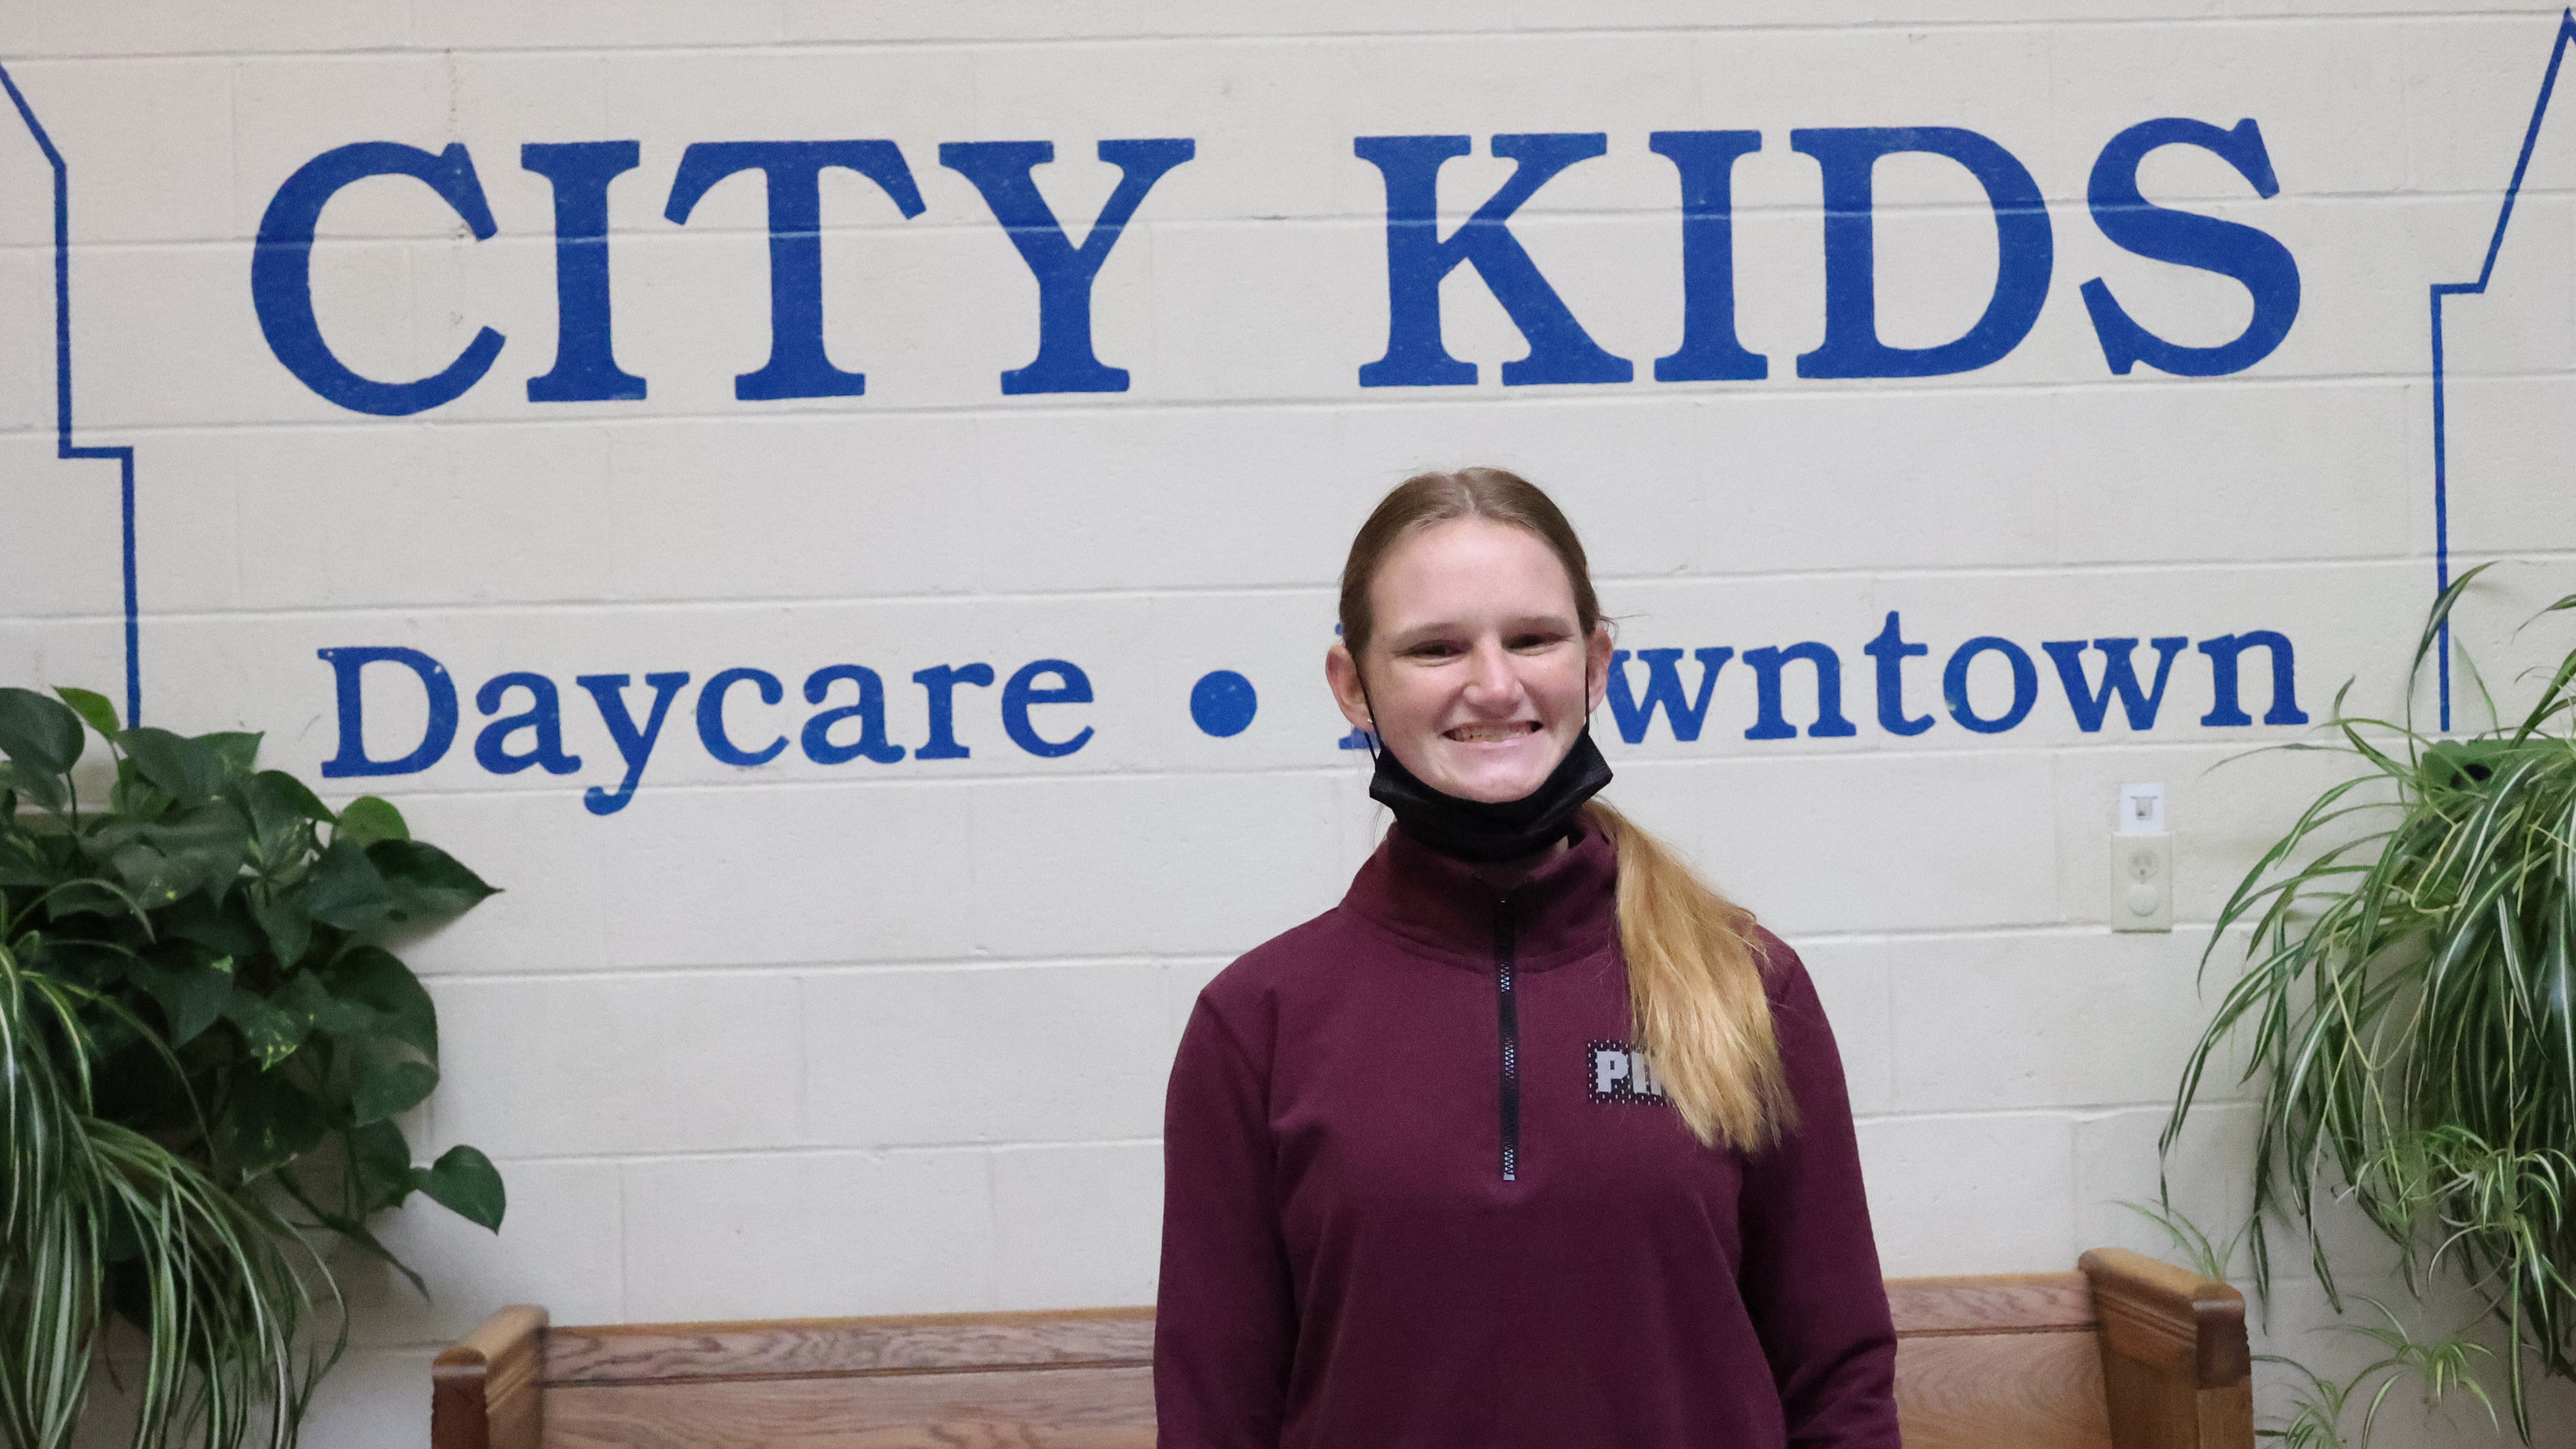 A white female student stands in front of a wall of the daycare she works at